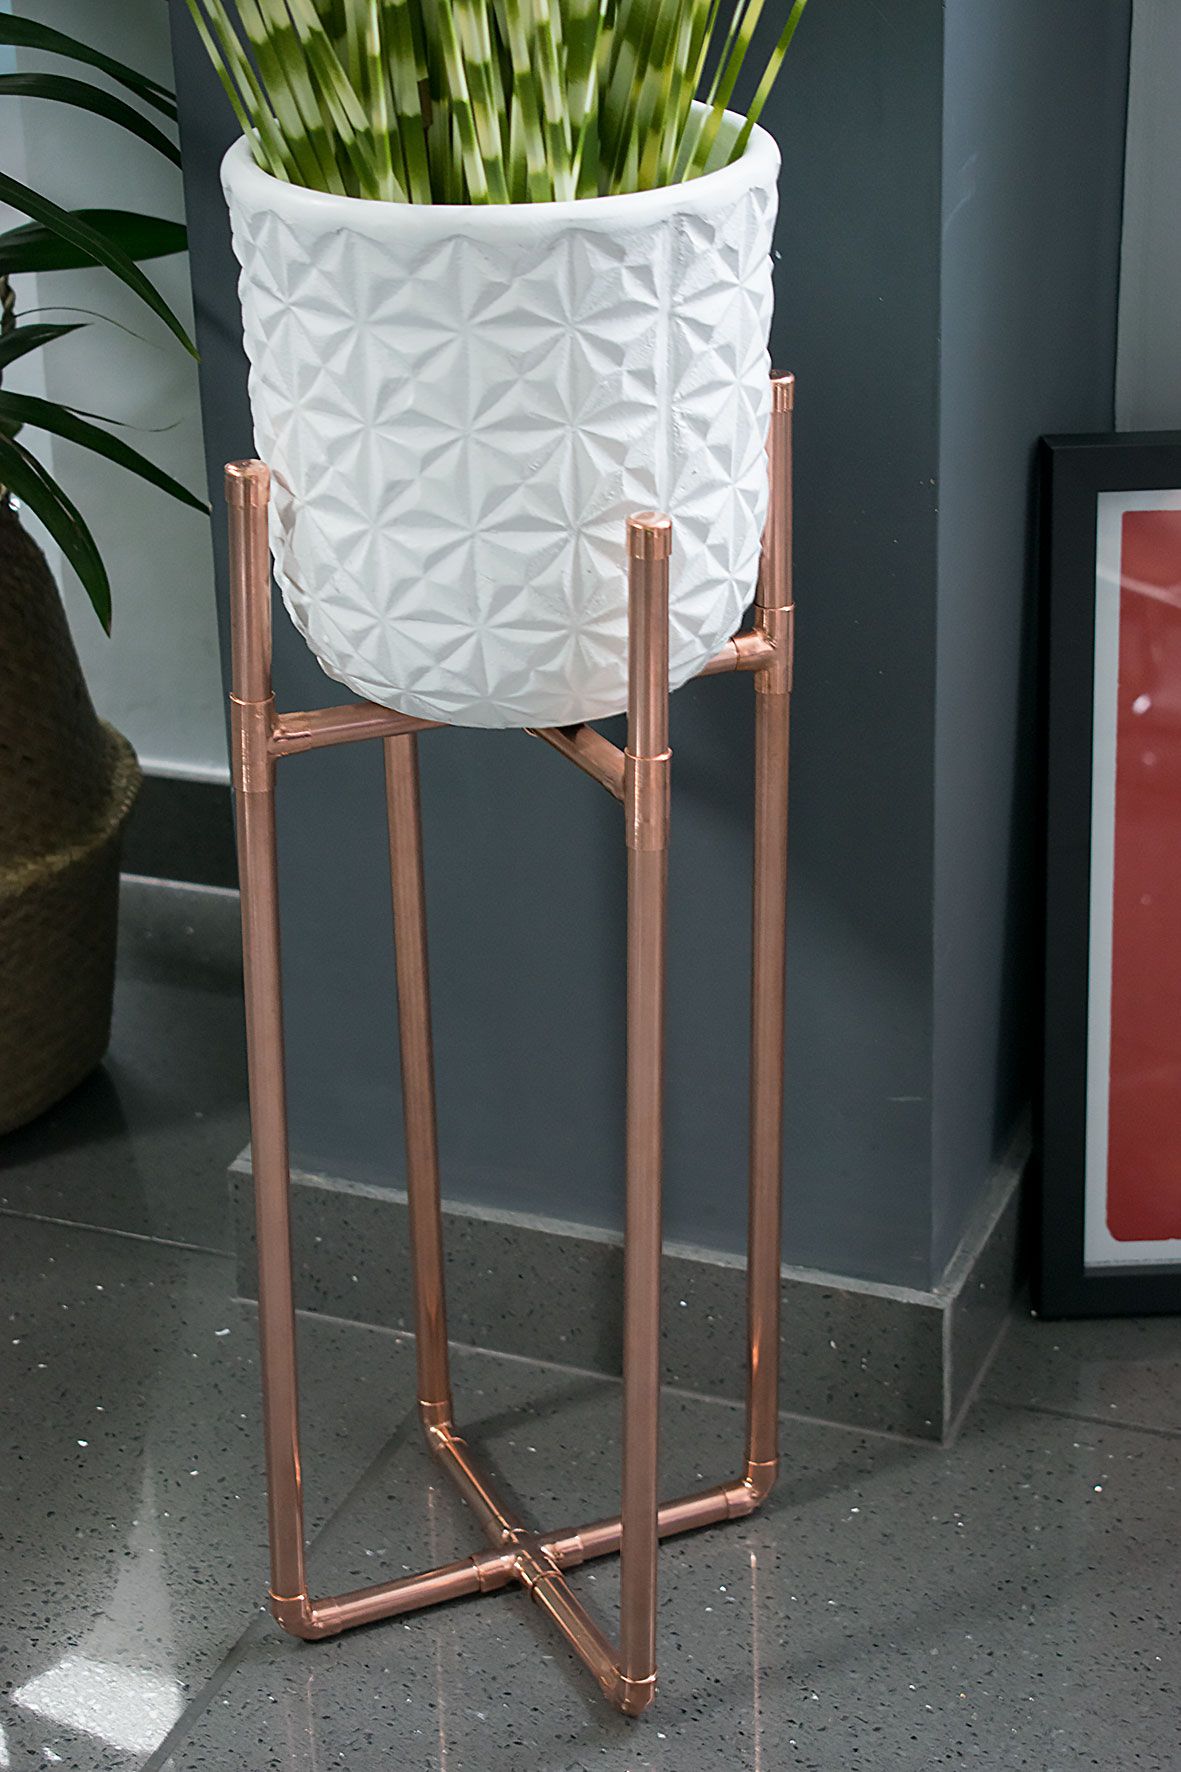 How To Make A Diy Copper Plant Stand – Caradise Throughout Copper Plant Stands (View 2 of 15)